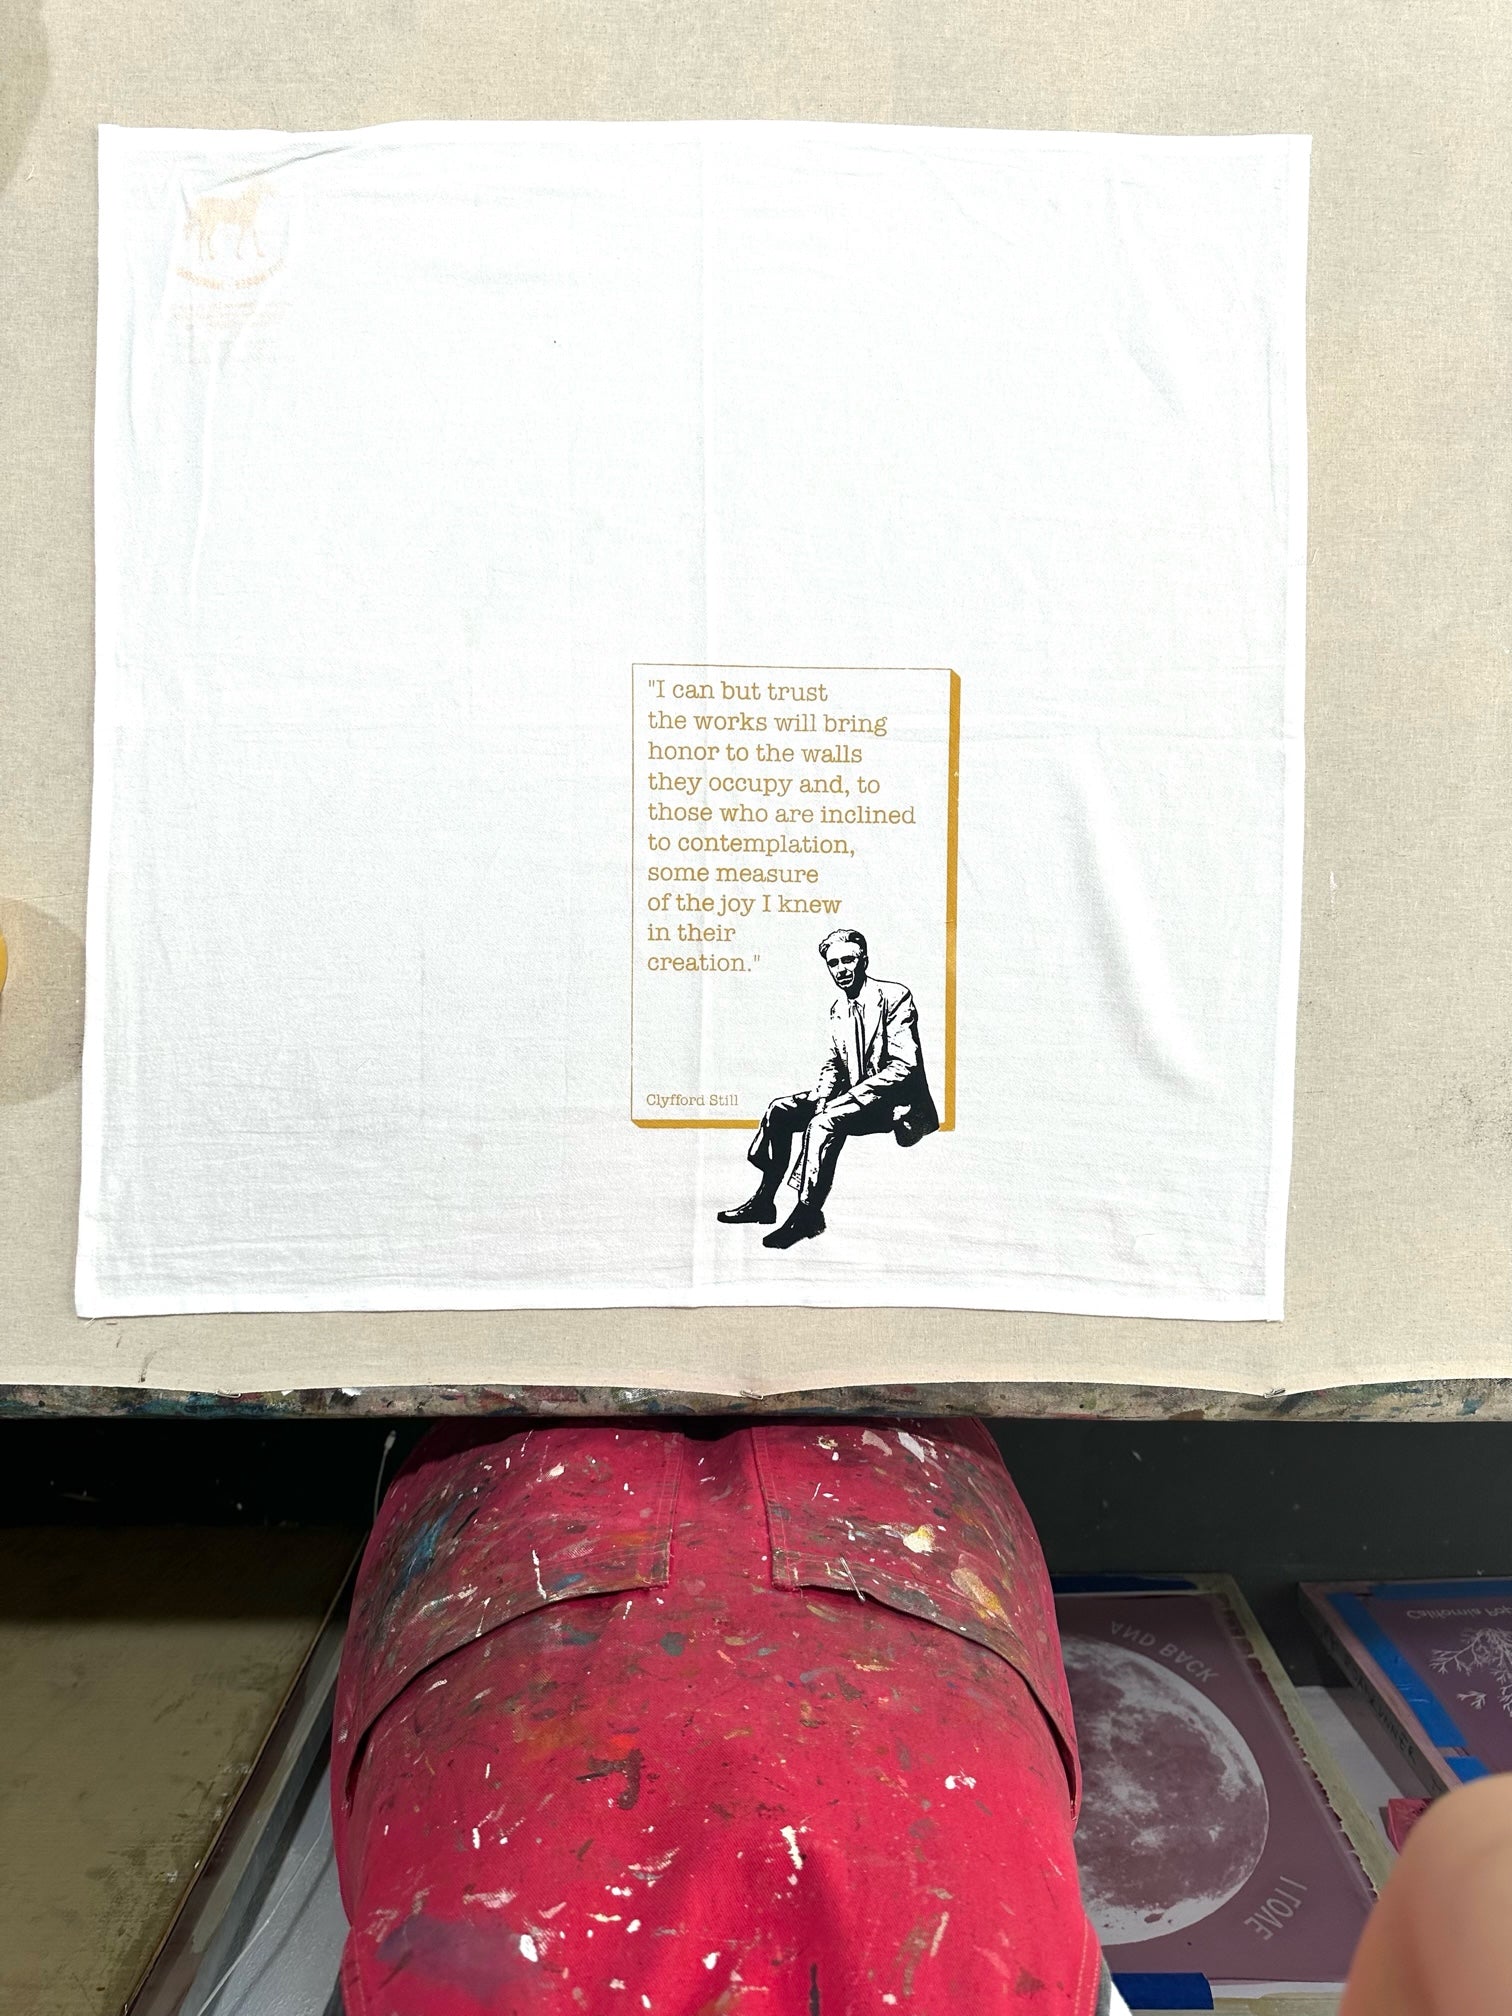 Top view of a white dish towel with the quote “ I can but trust the works will bring honor to the walls they occupy and, to those who are inclined to contemplation, some measure of the the joy I knew in their creation.” And a black and white graphic of Clyfford Still.